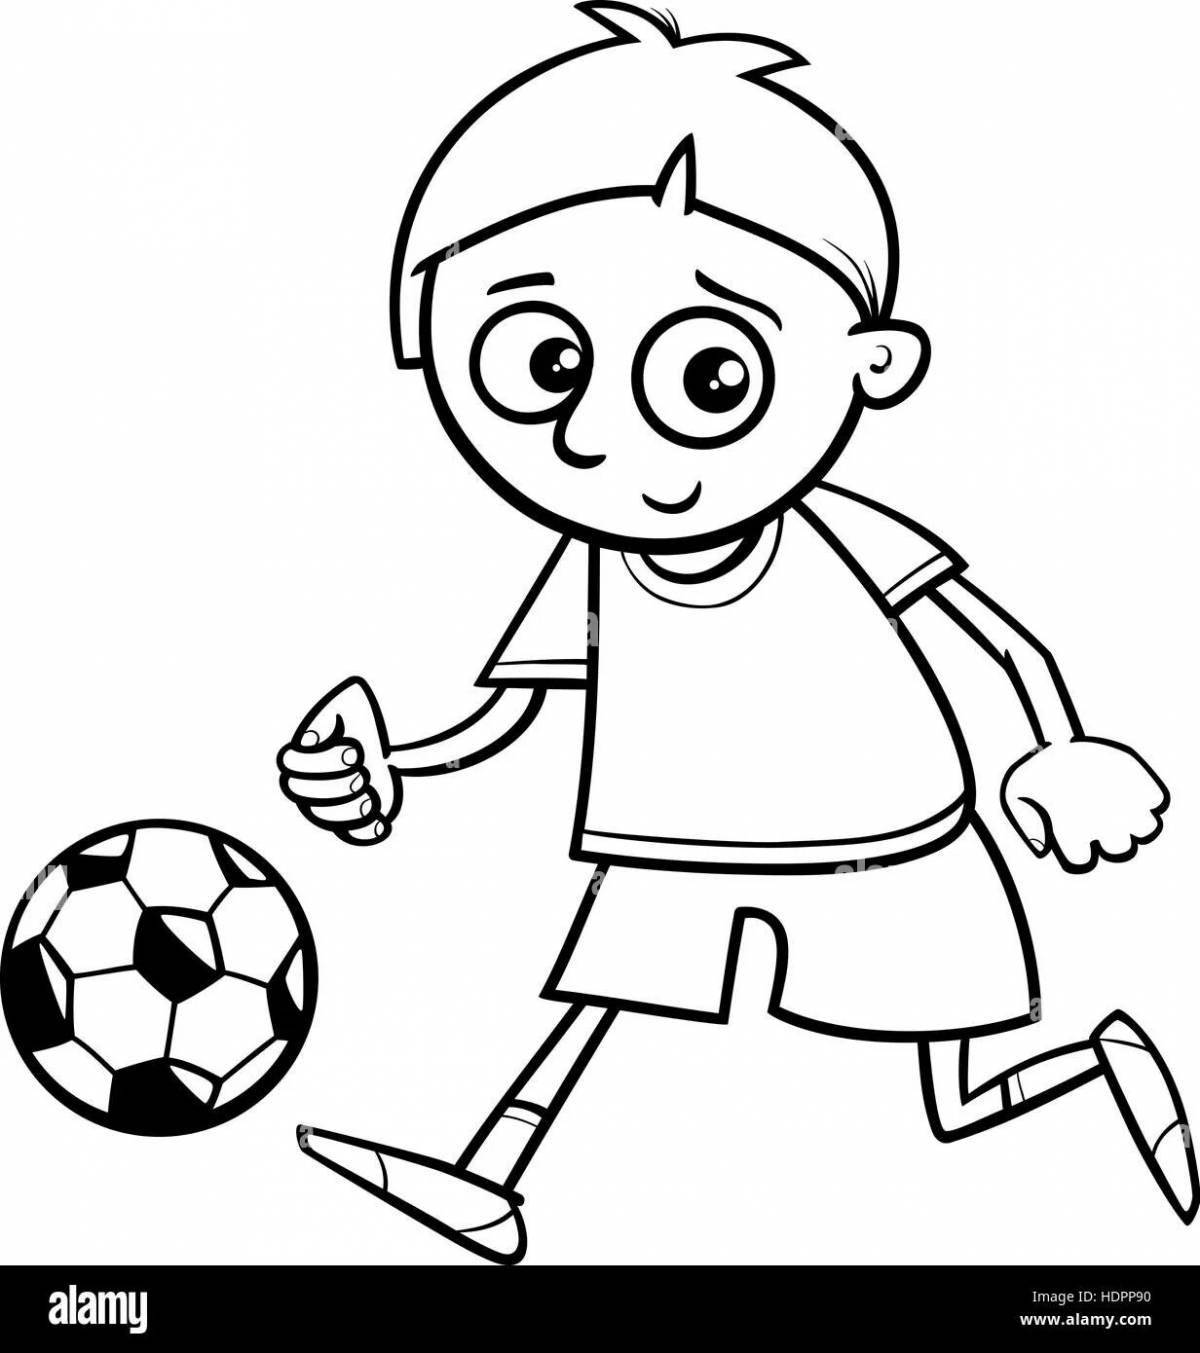 Coloring page of a cheerful boy playing football